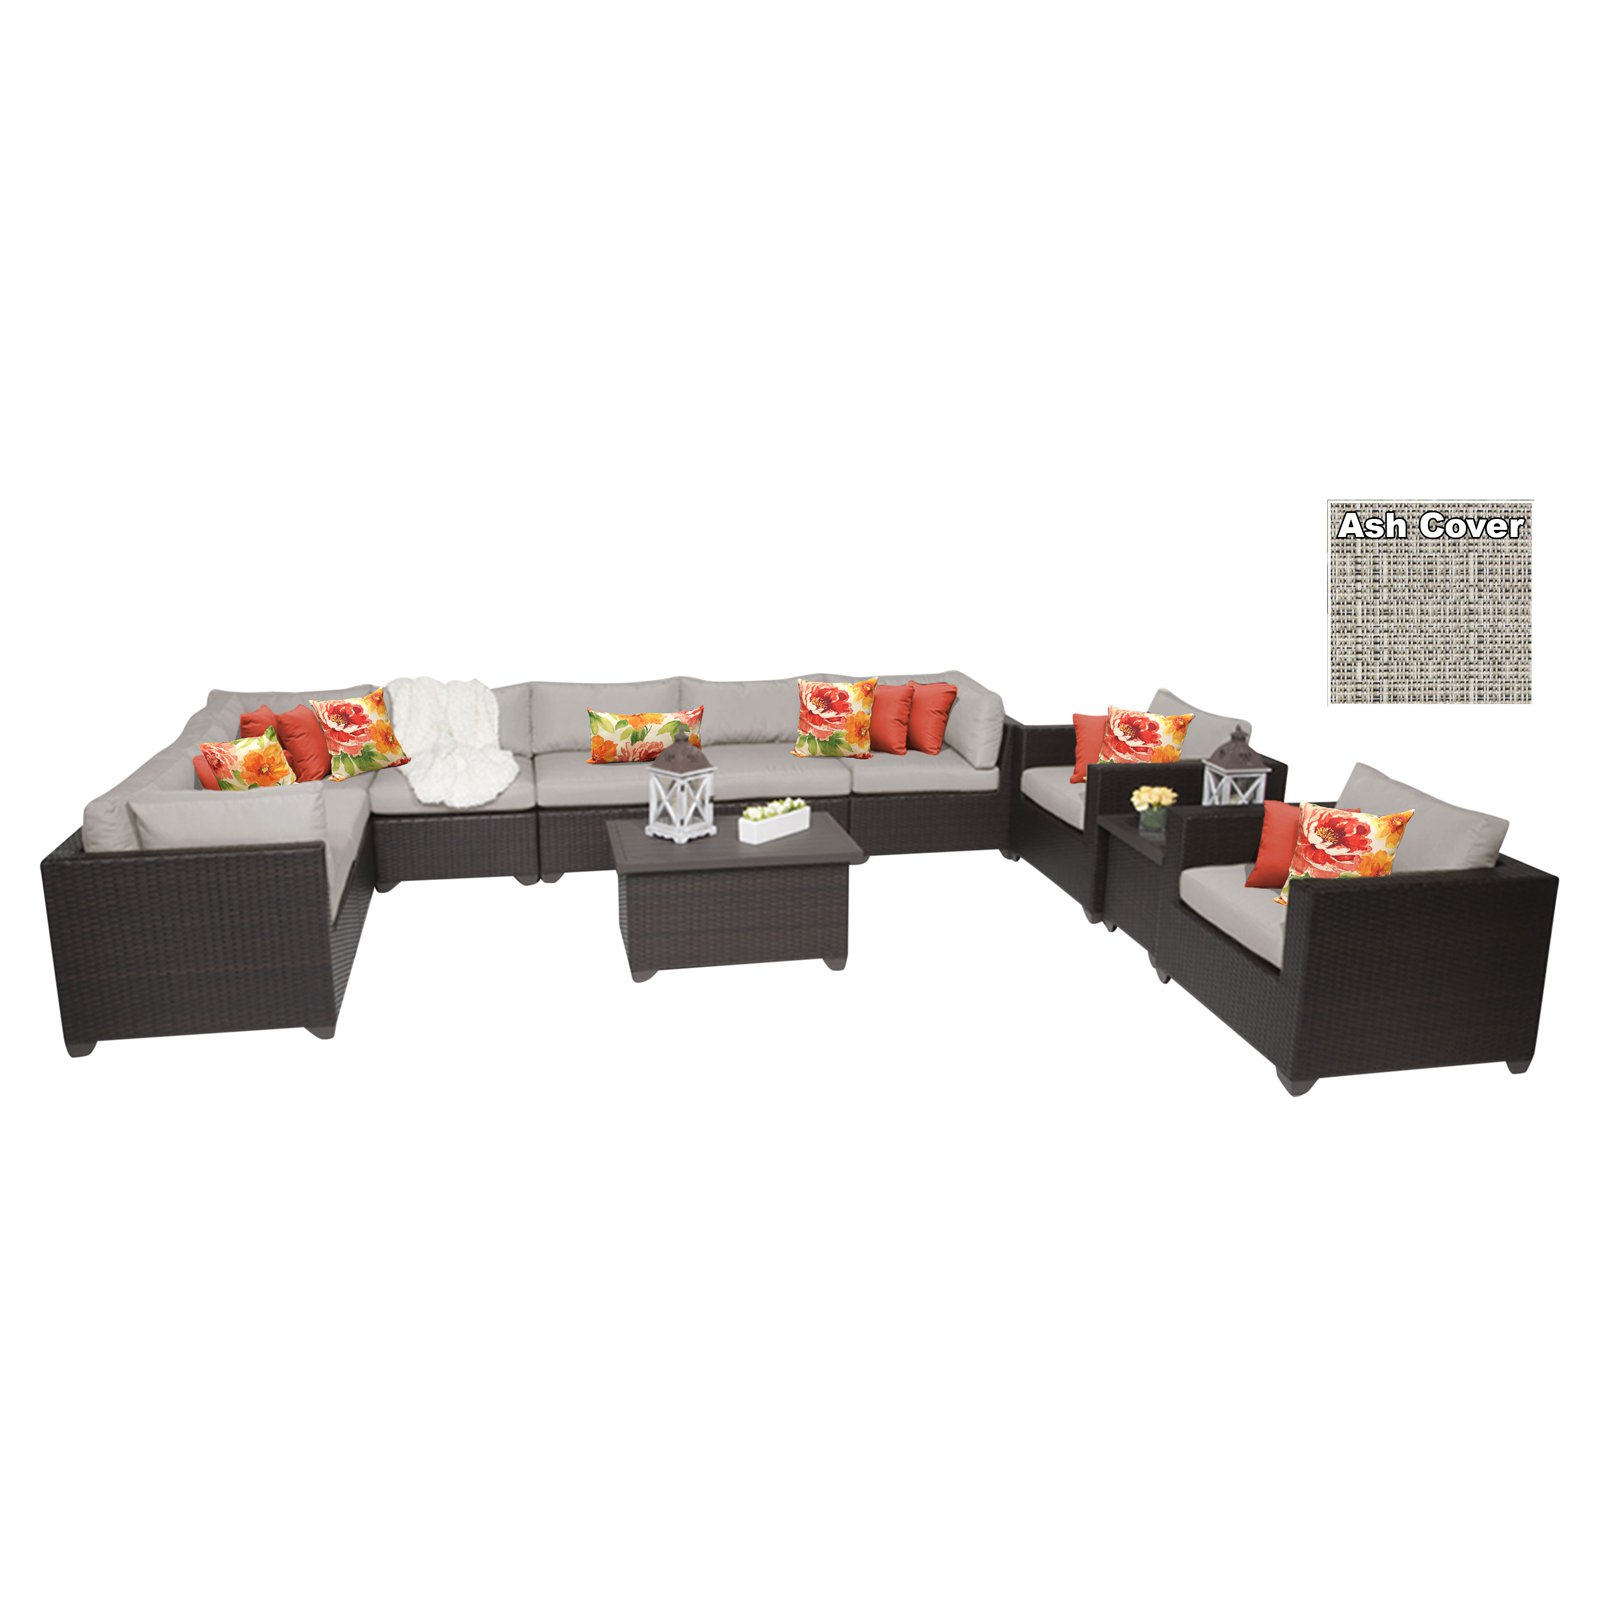 TK Classics Belle Wicker 11 Piece Patio Conversation Set with 2 Sets of Cushion Covers - image 1 of 2